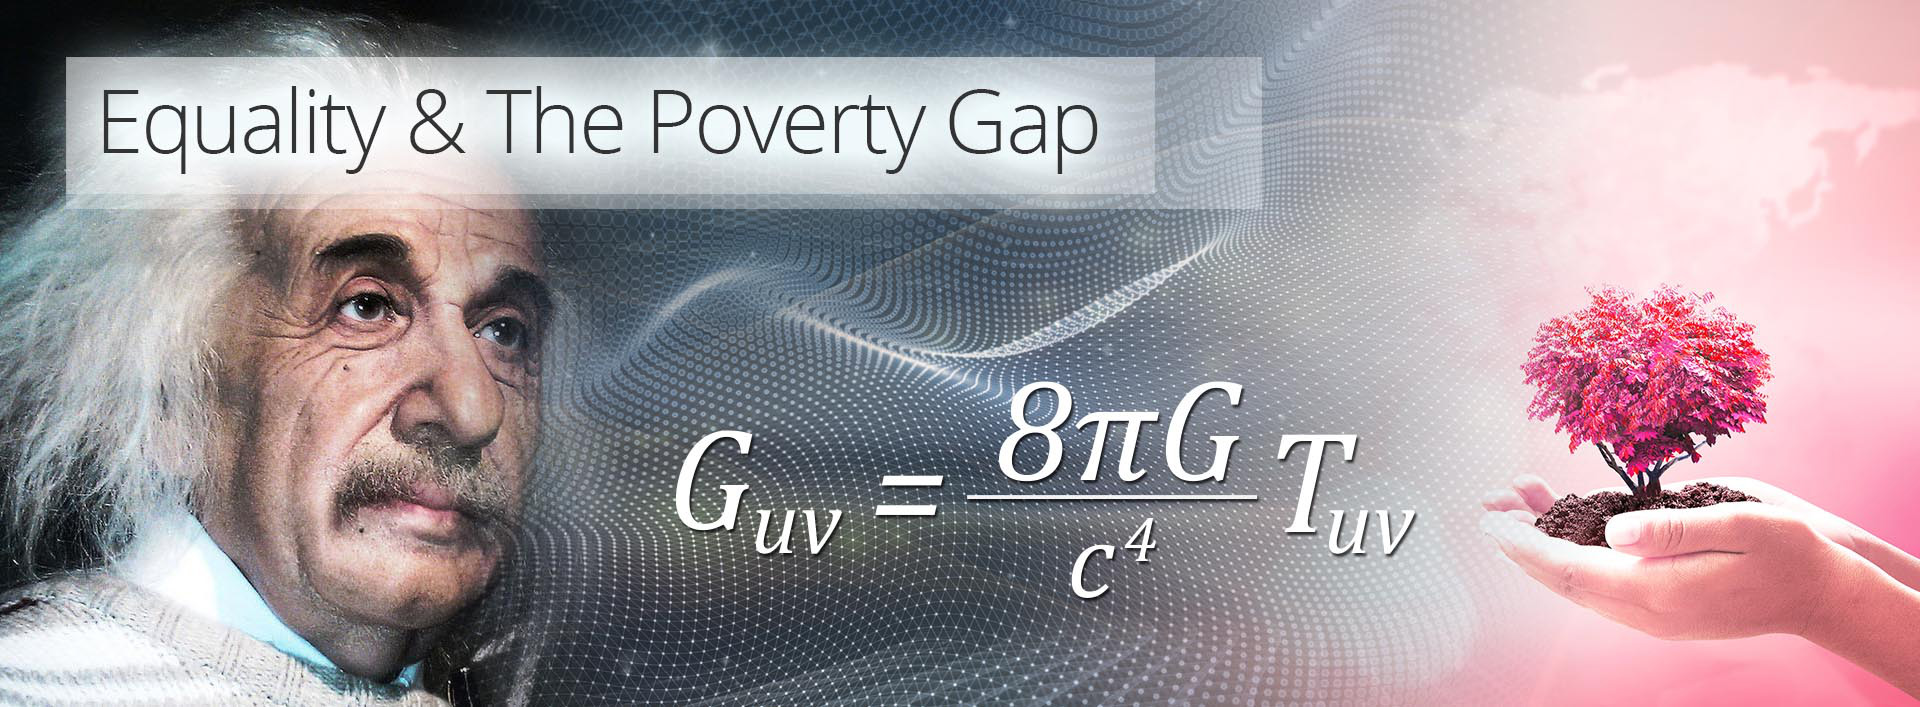 equality & the poverty gap